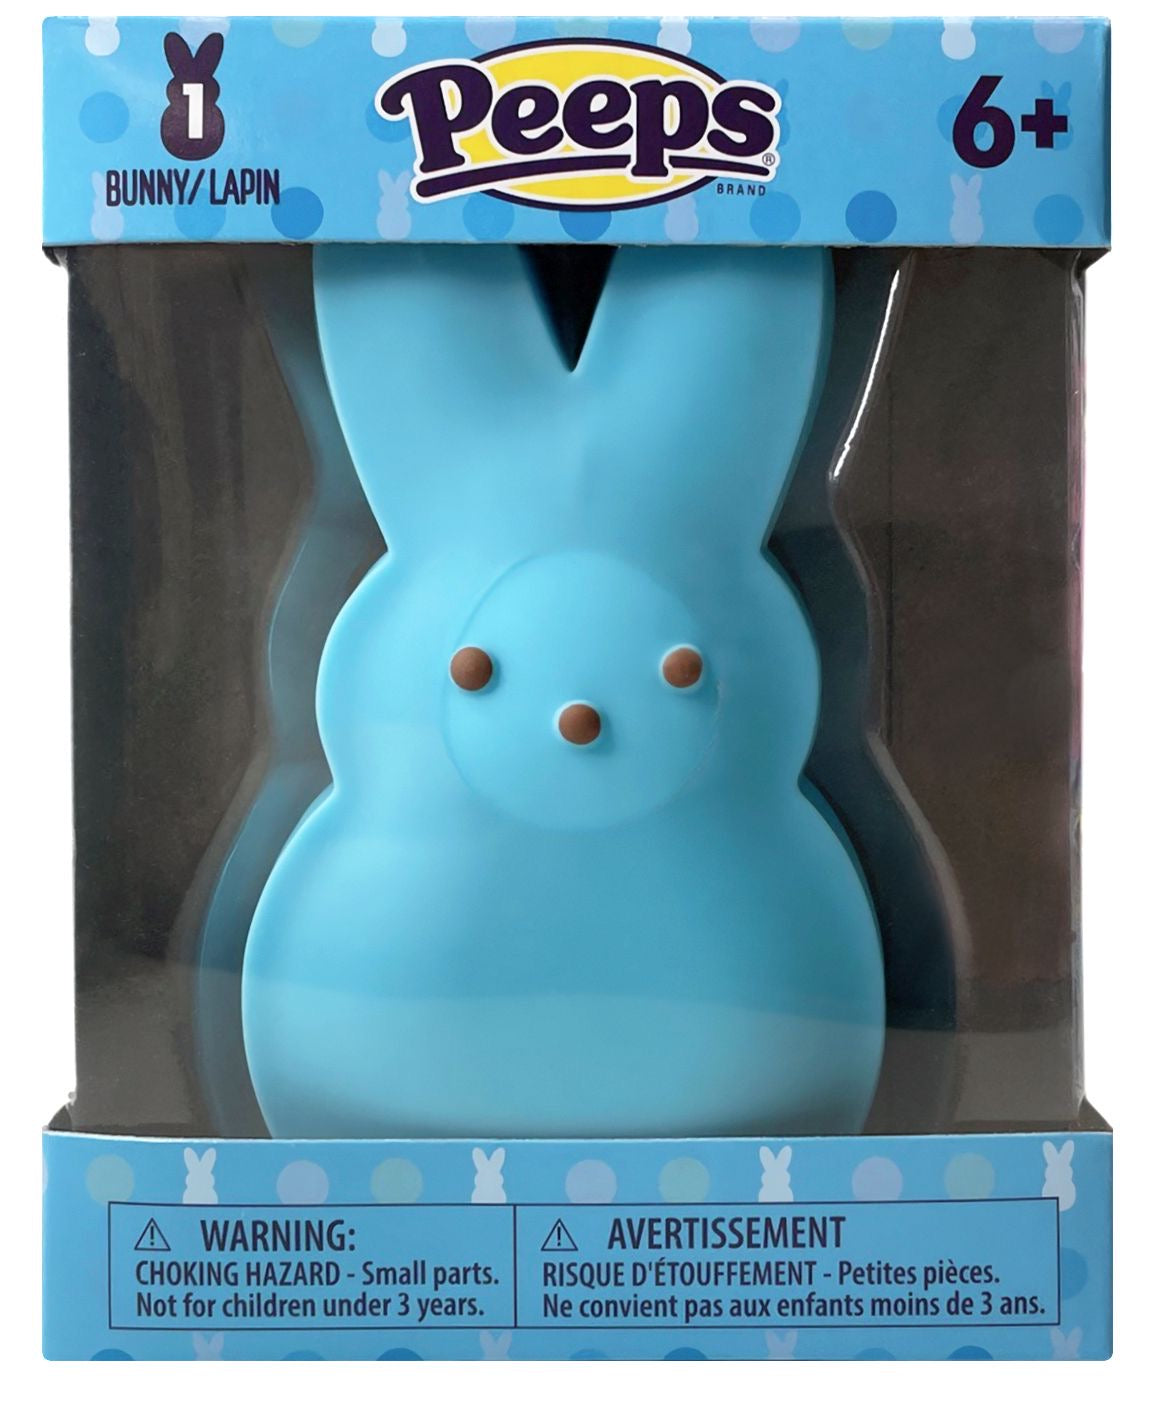 Peeps Bunny Squishables in Pink, Purple and Blue